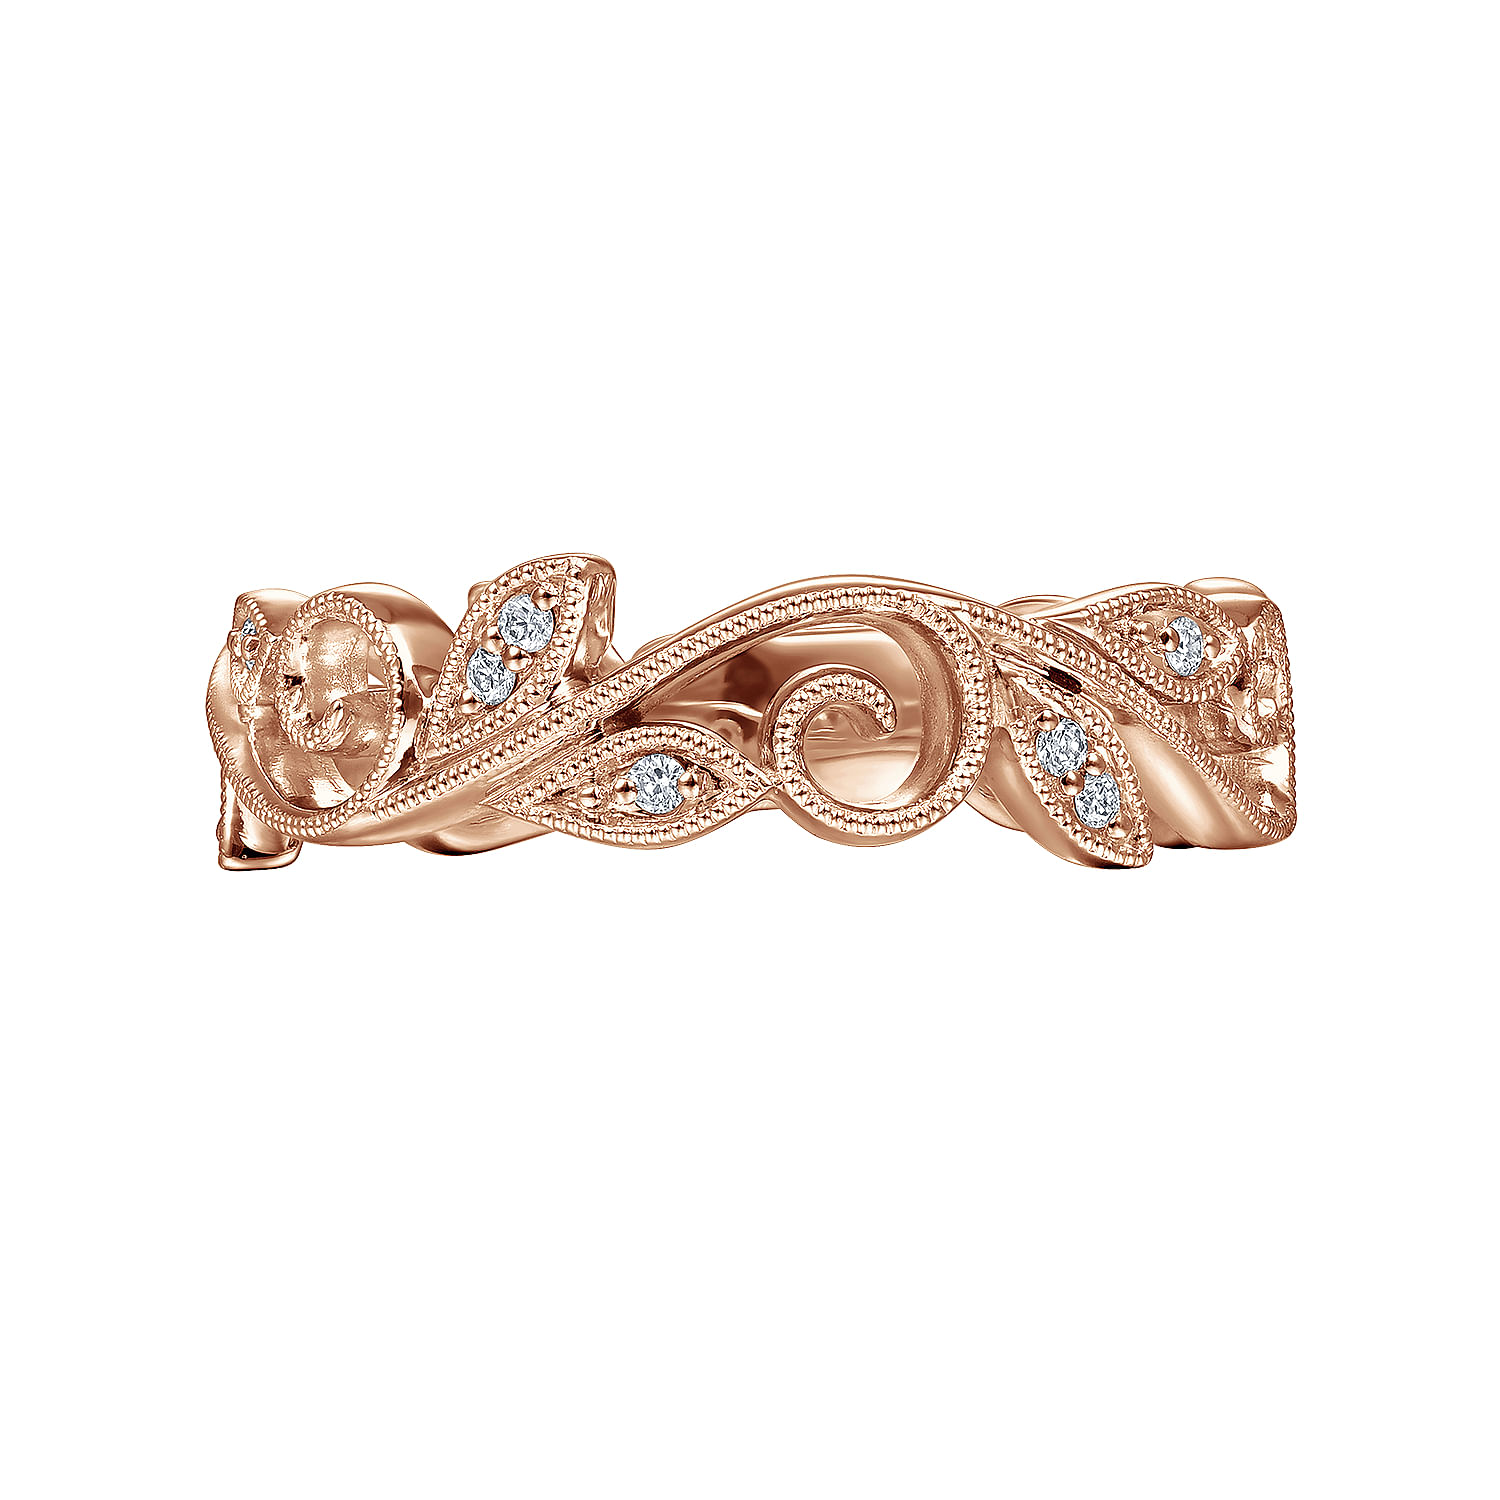 14K Rose Gold Scrolling Floral Diamond Stackable Ring